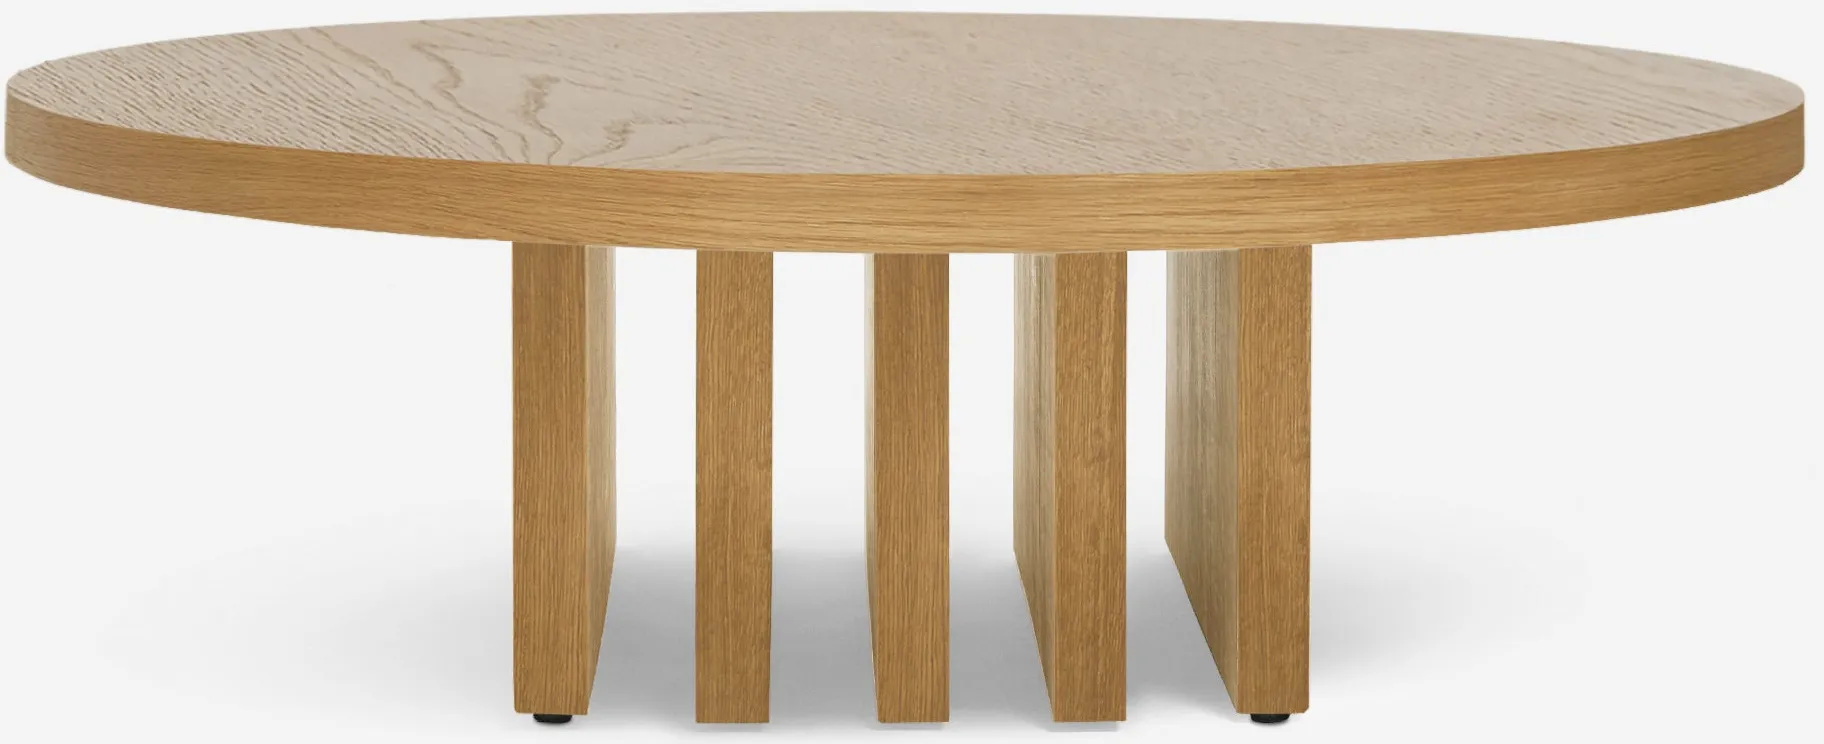 Pentwater Round Coffee Table by Sarah Sherman Samuel